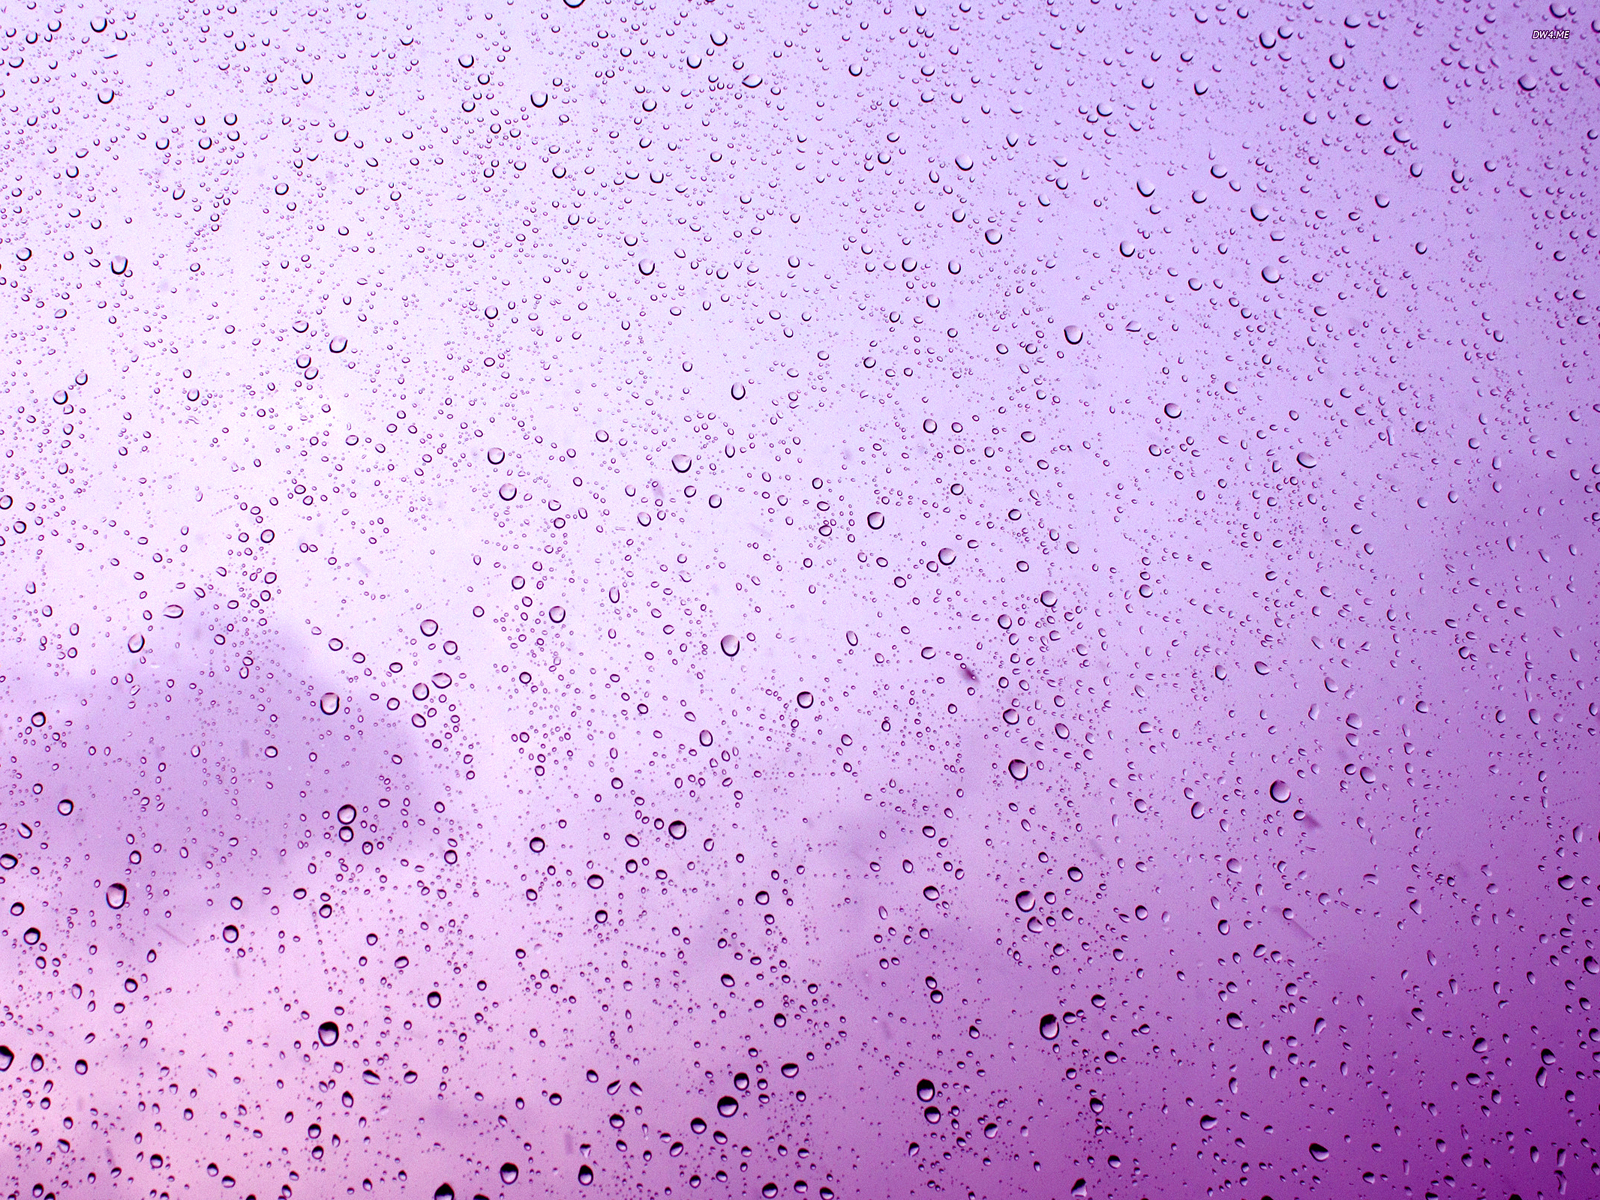 Raindrops on a purple flowers Powerpoint Templates - Black, Flowers,  Fuchsia / Magenta, Silver - Free PPT Backgrounds and Templates